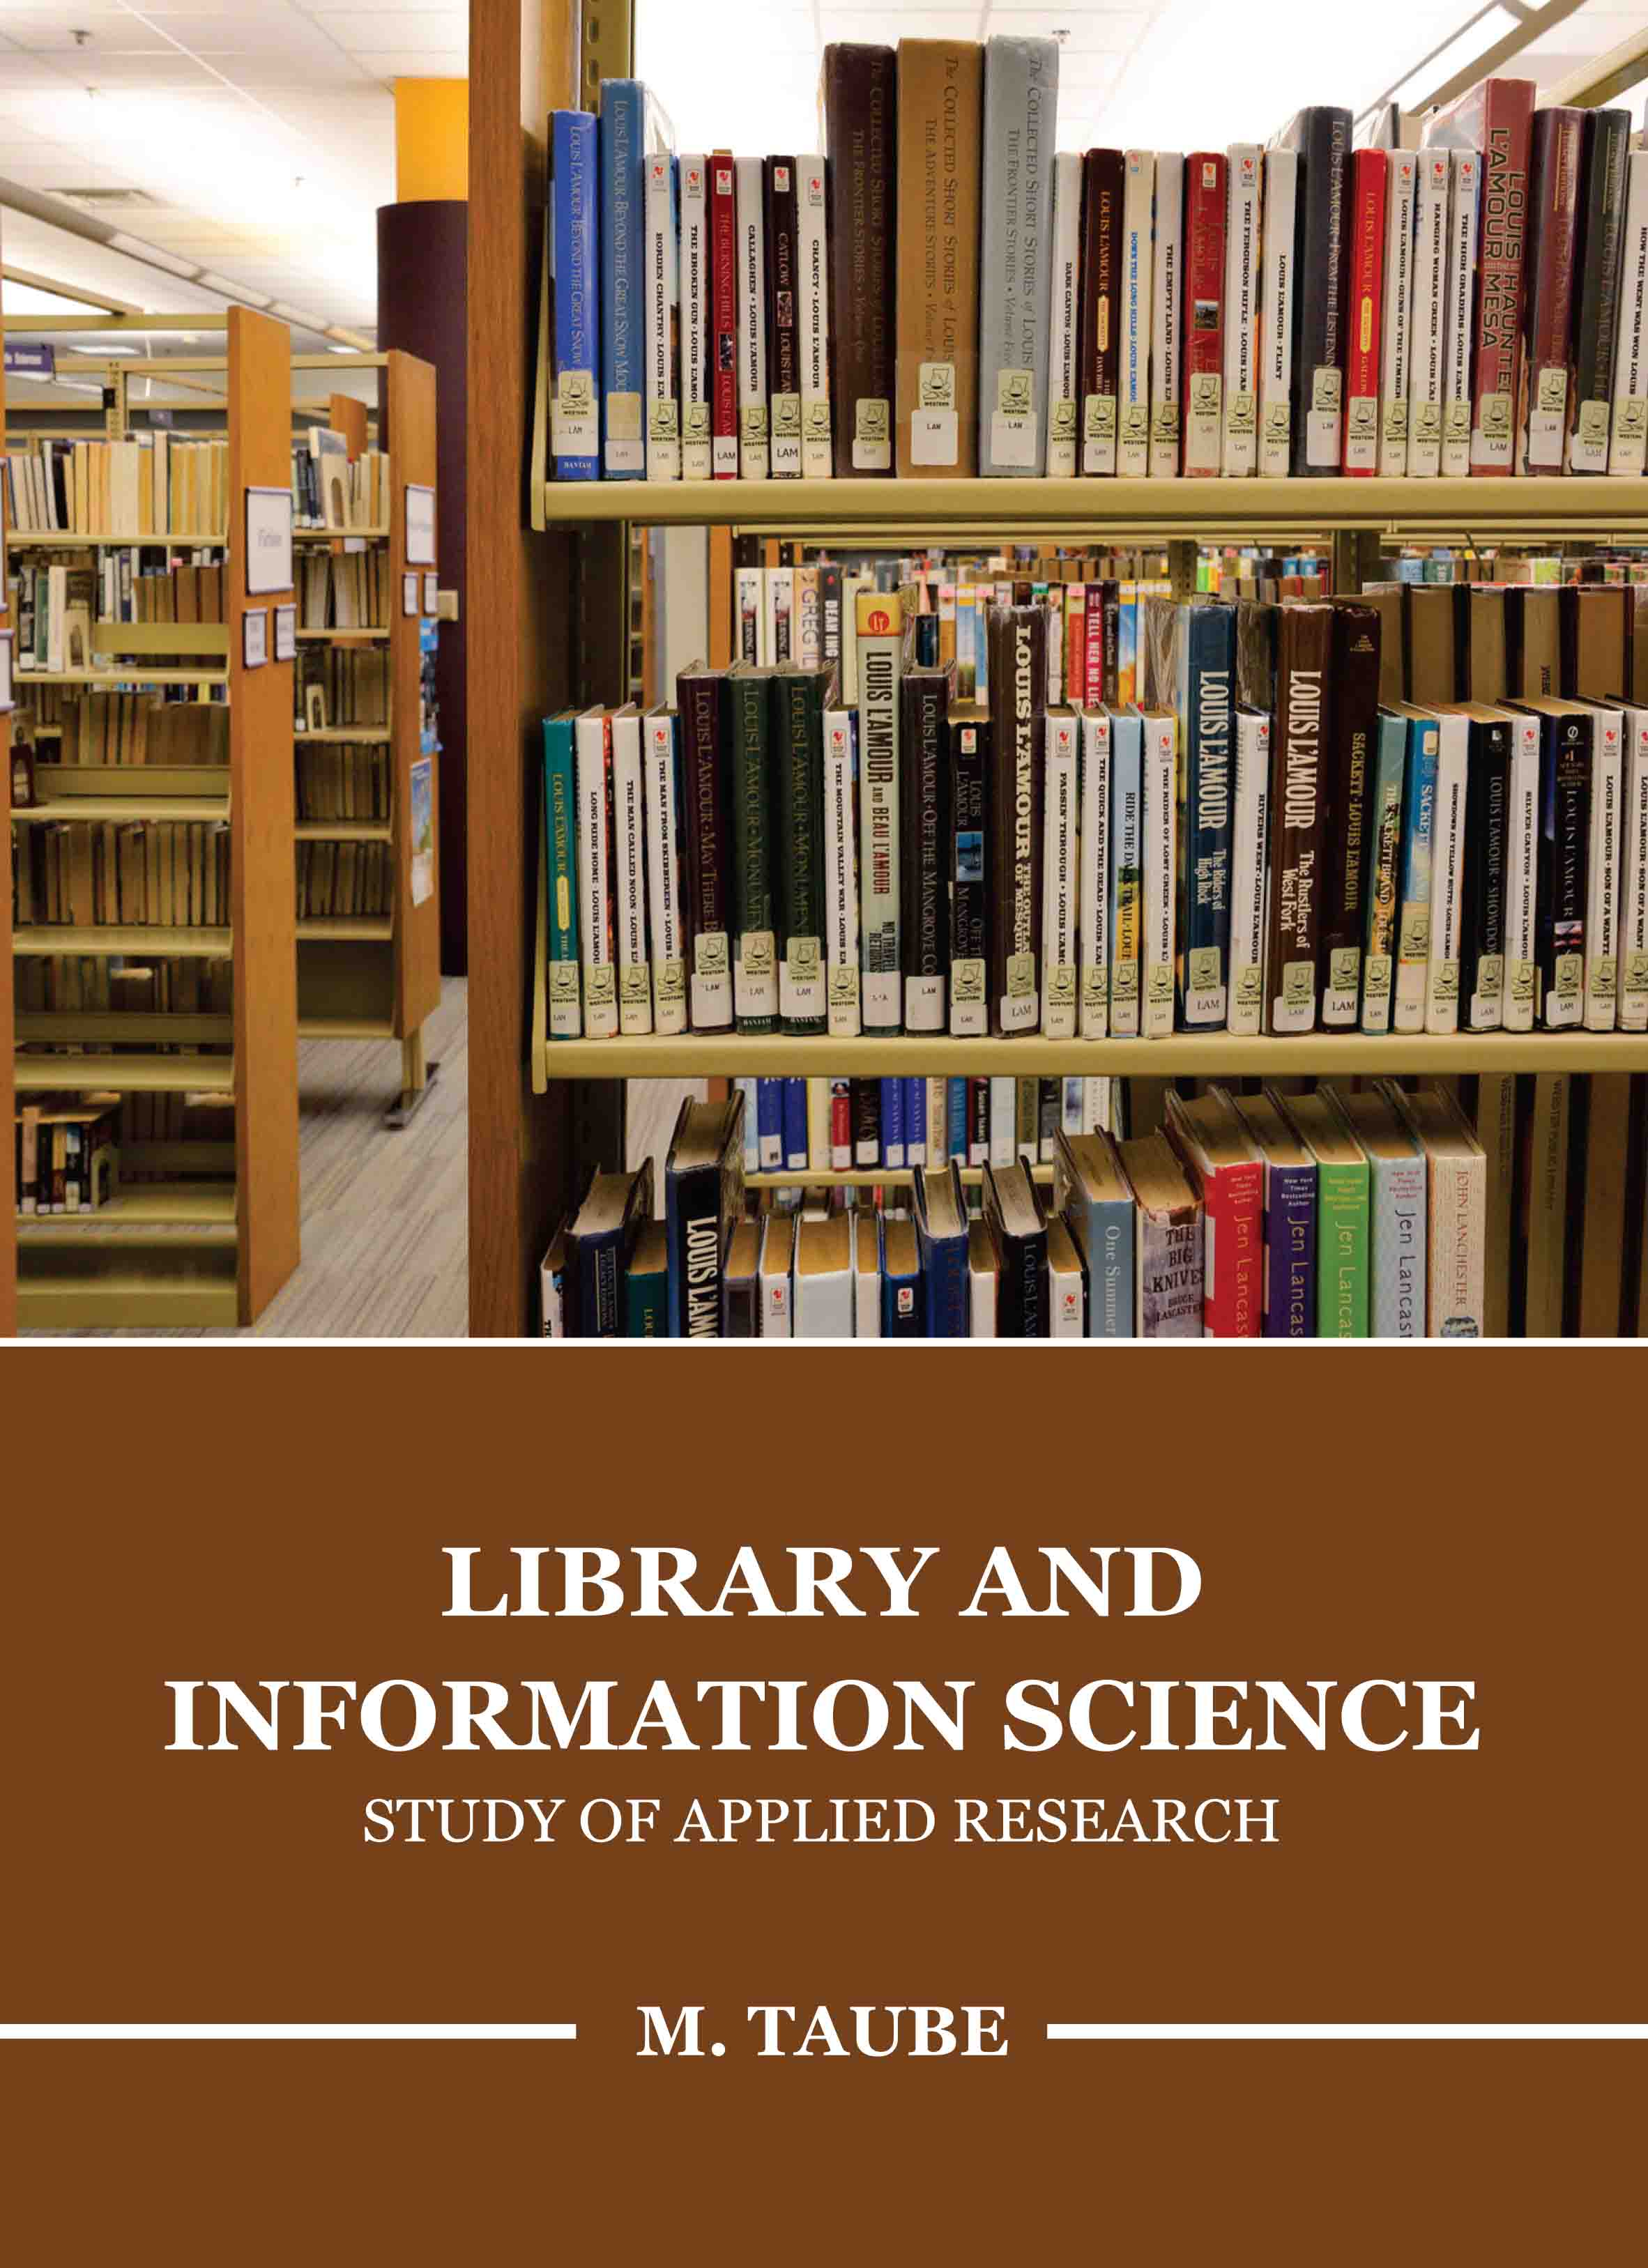 Library and Information Science: Study of Applied Research